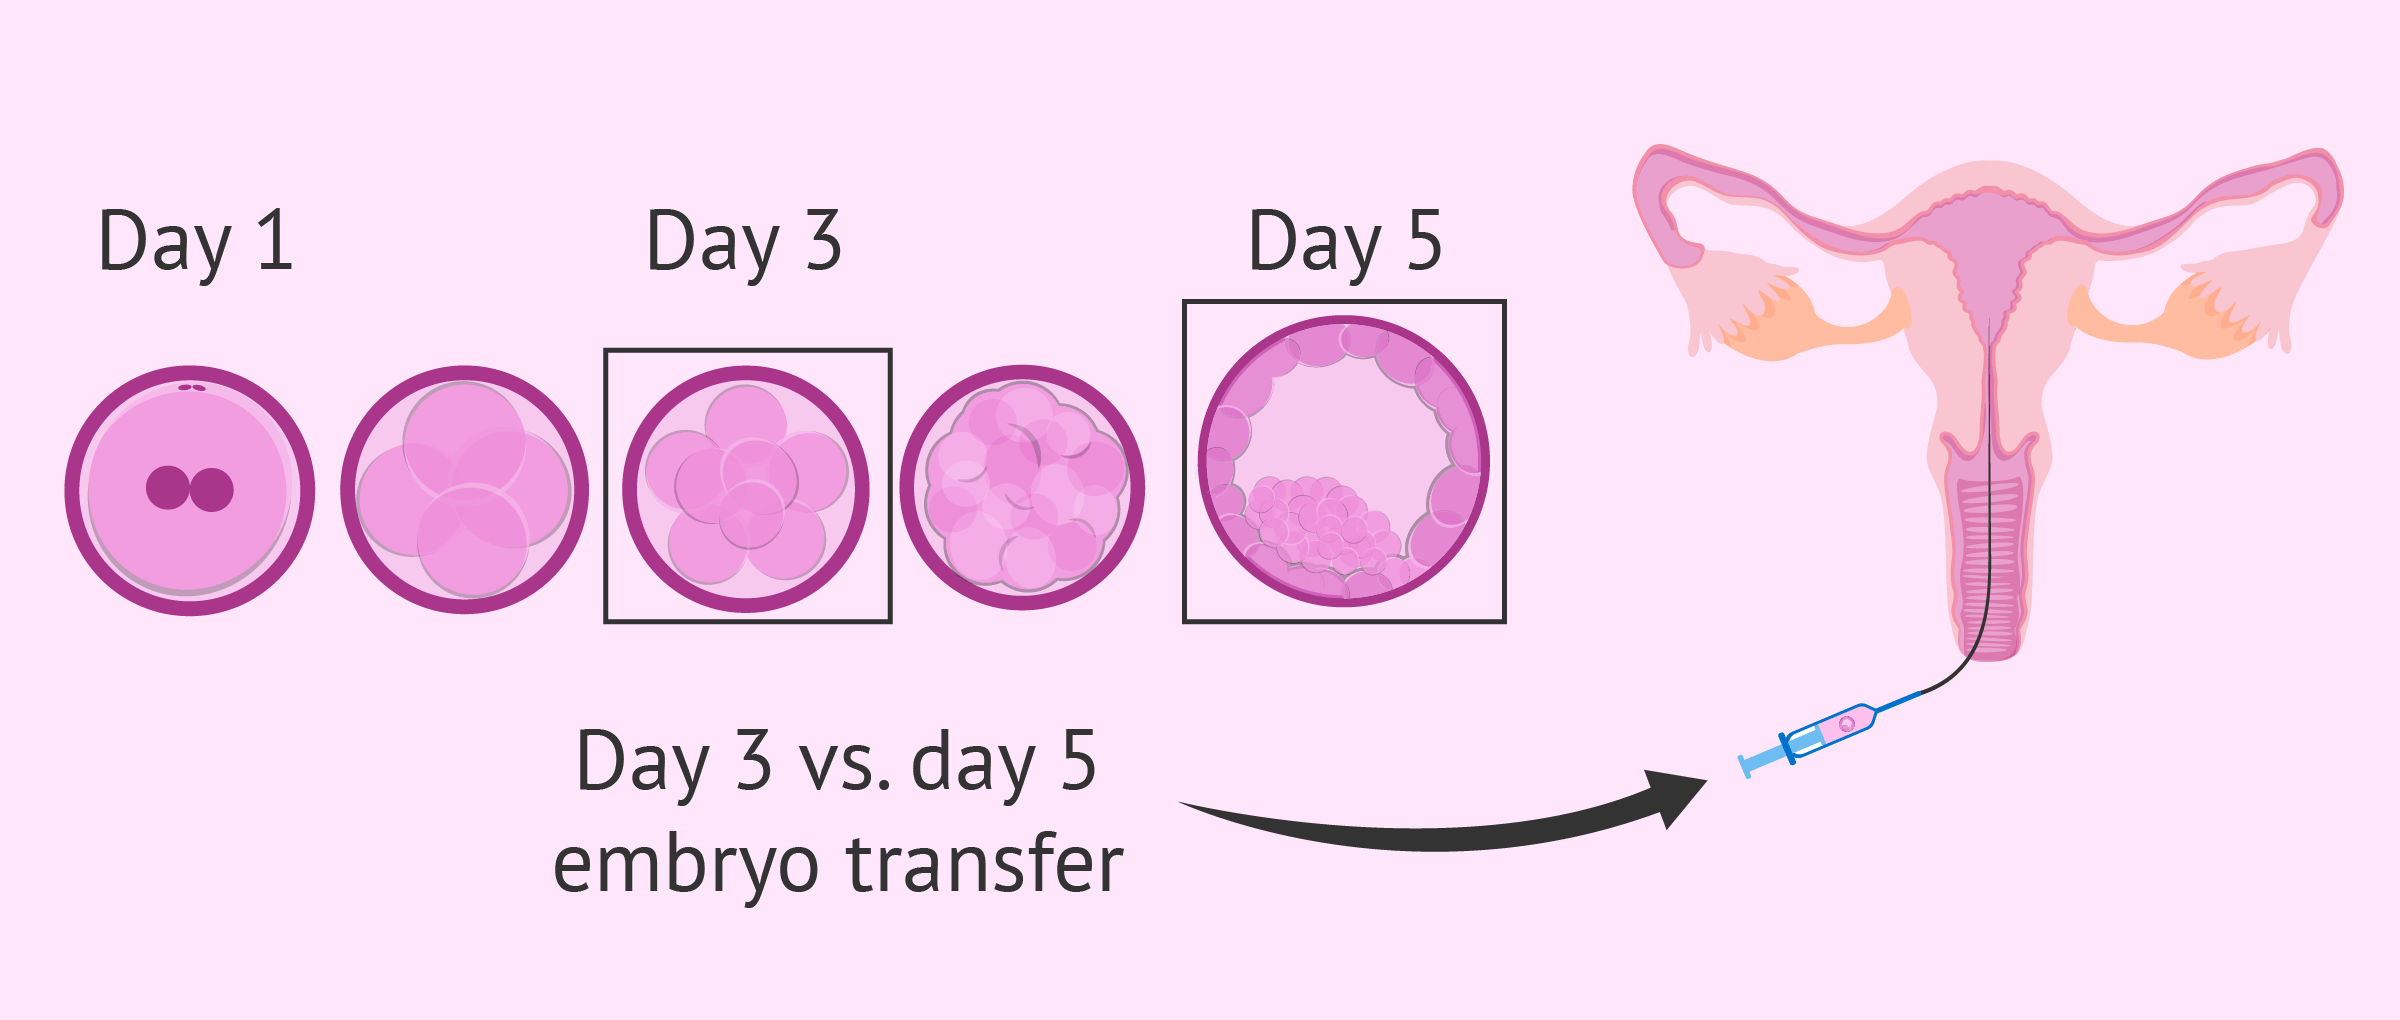 Embryo transfer on day 3 or on day 5? InviTRA